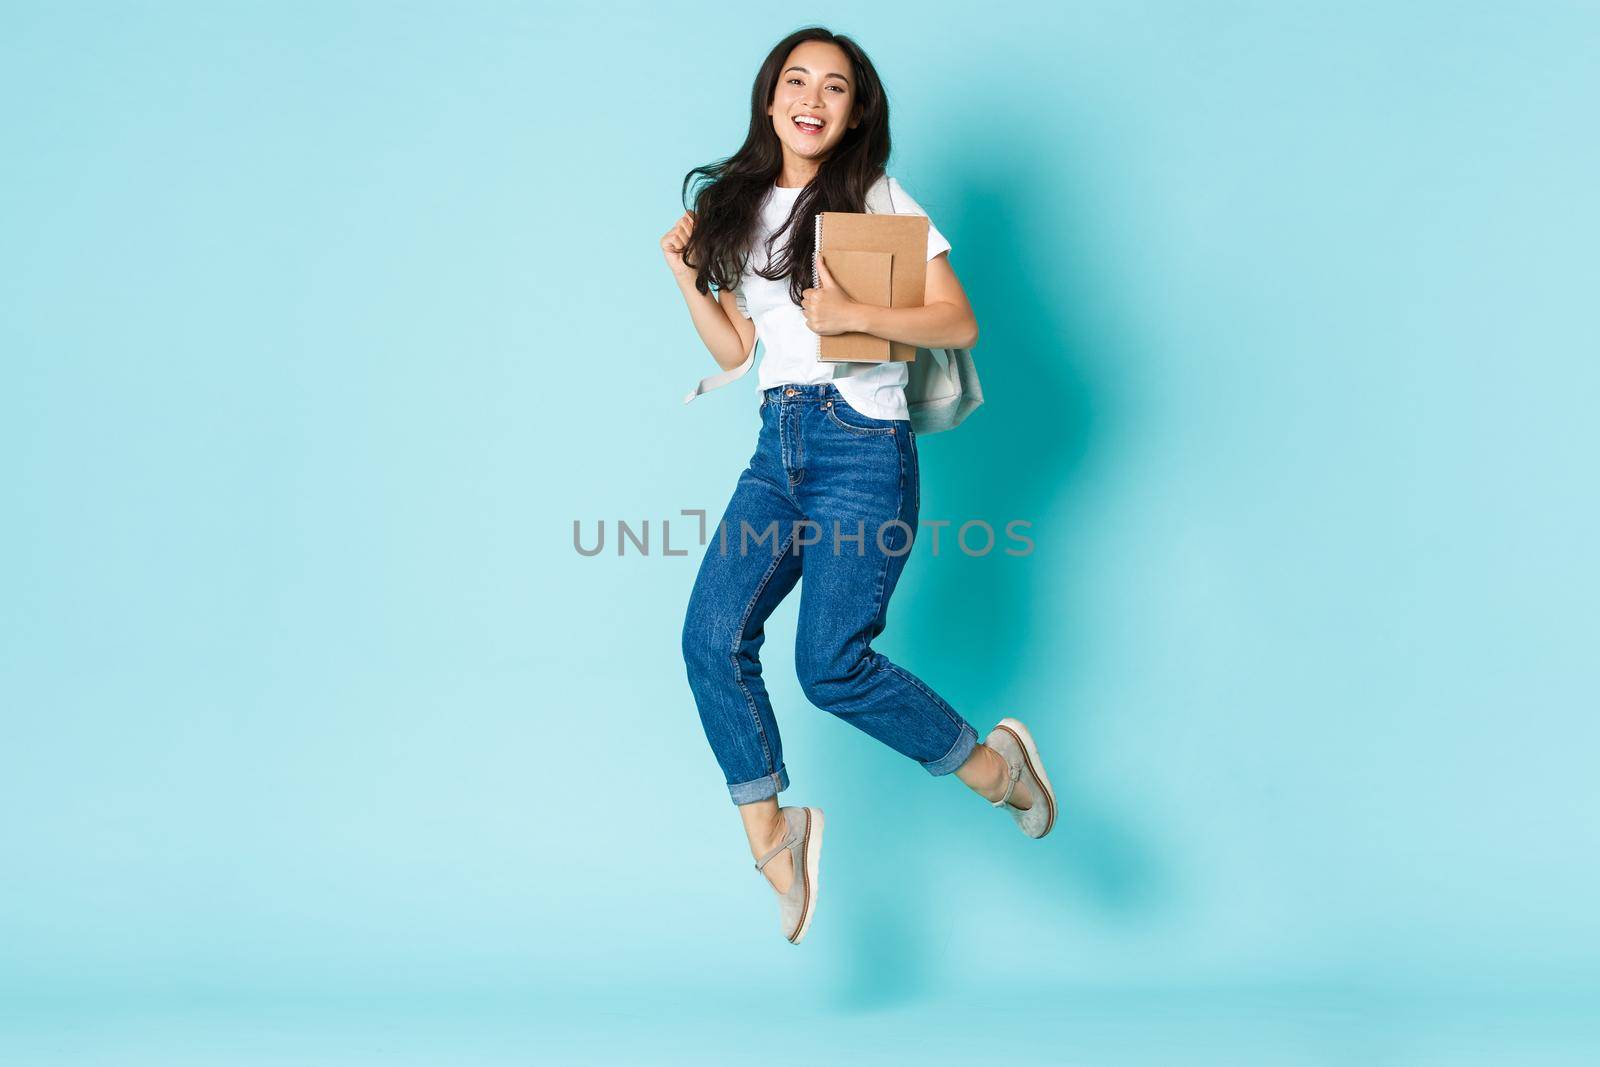 Fashion, back to school and lifestyle concept. Cheerful young asian girl, korean student looking upbeat, holding backpack and notebooks, jumping upbeat over light blue background.